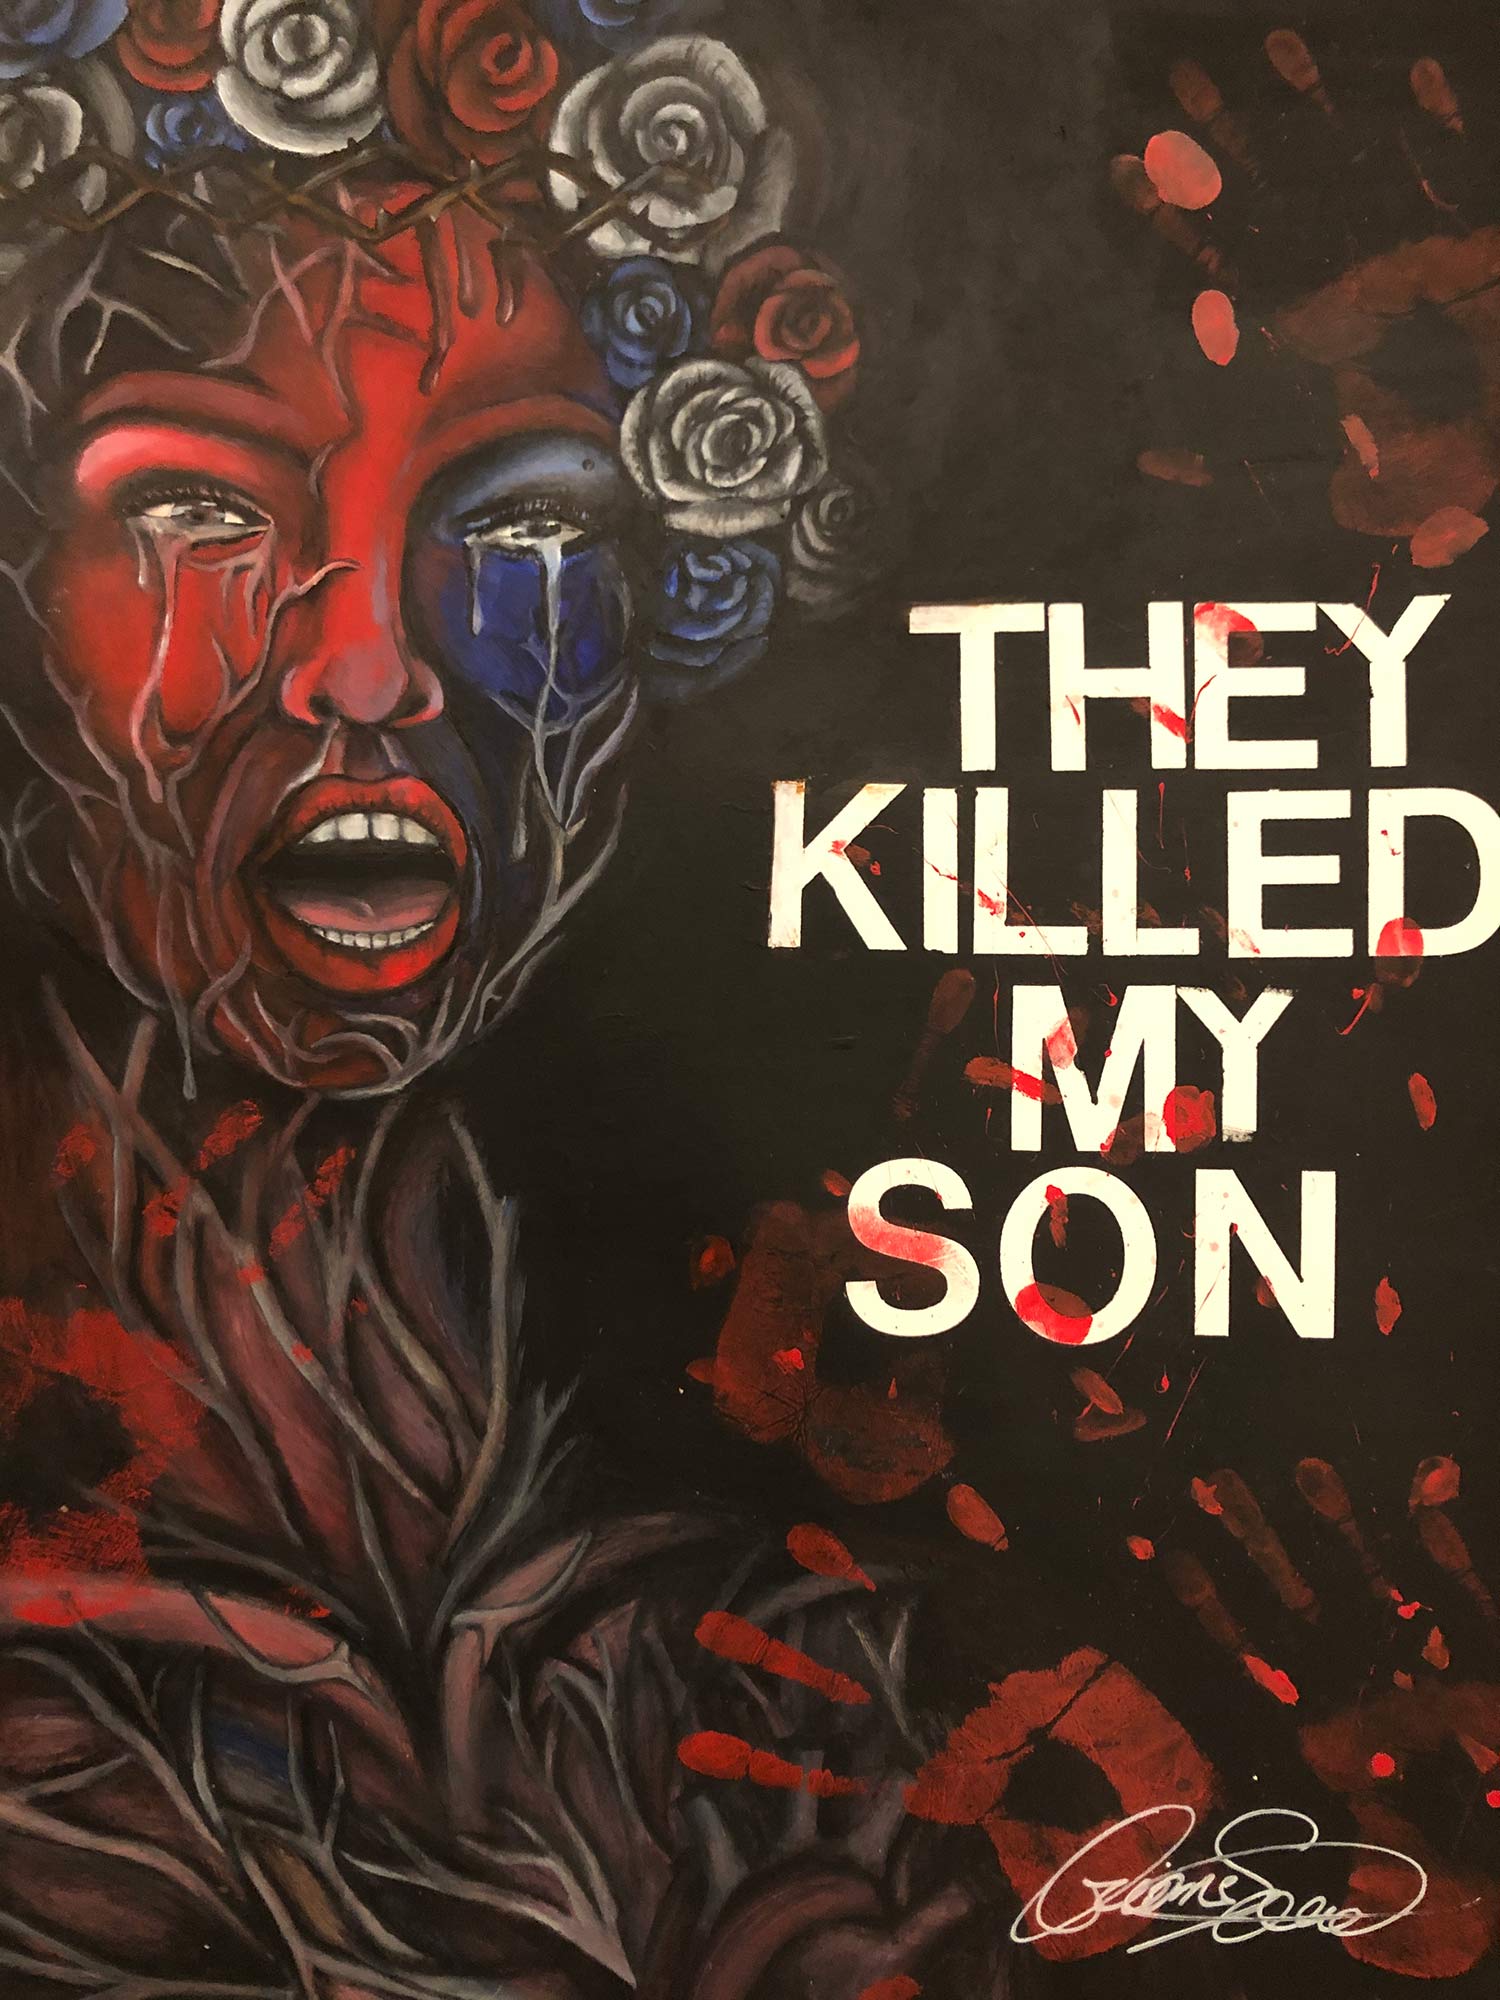 A paitning of a woman crying with the text "They killed my son"